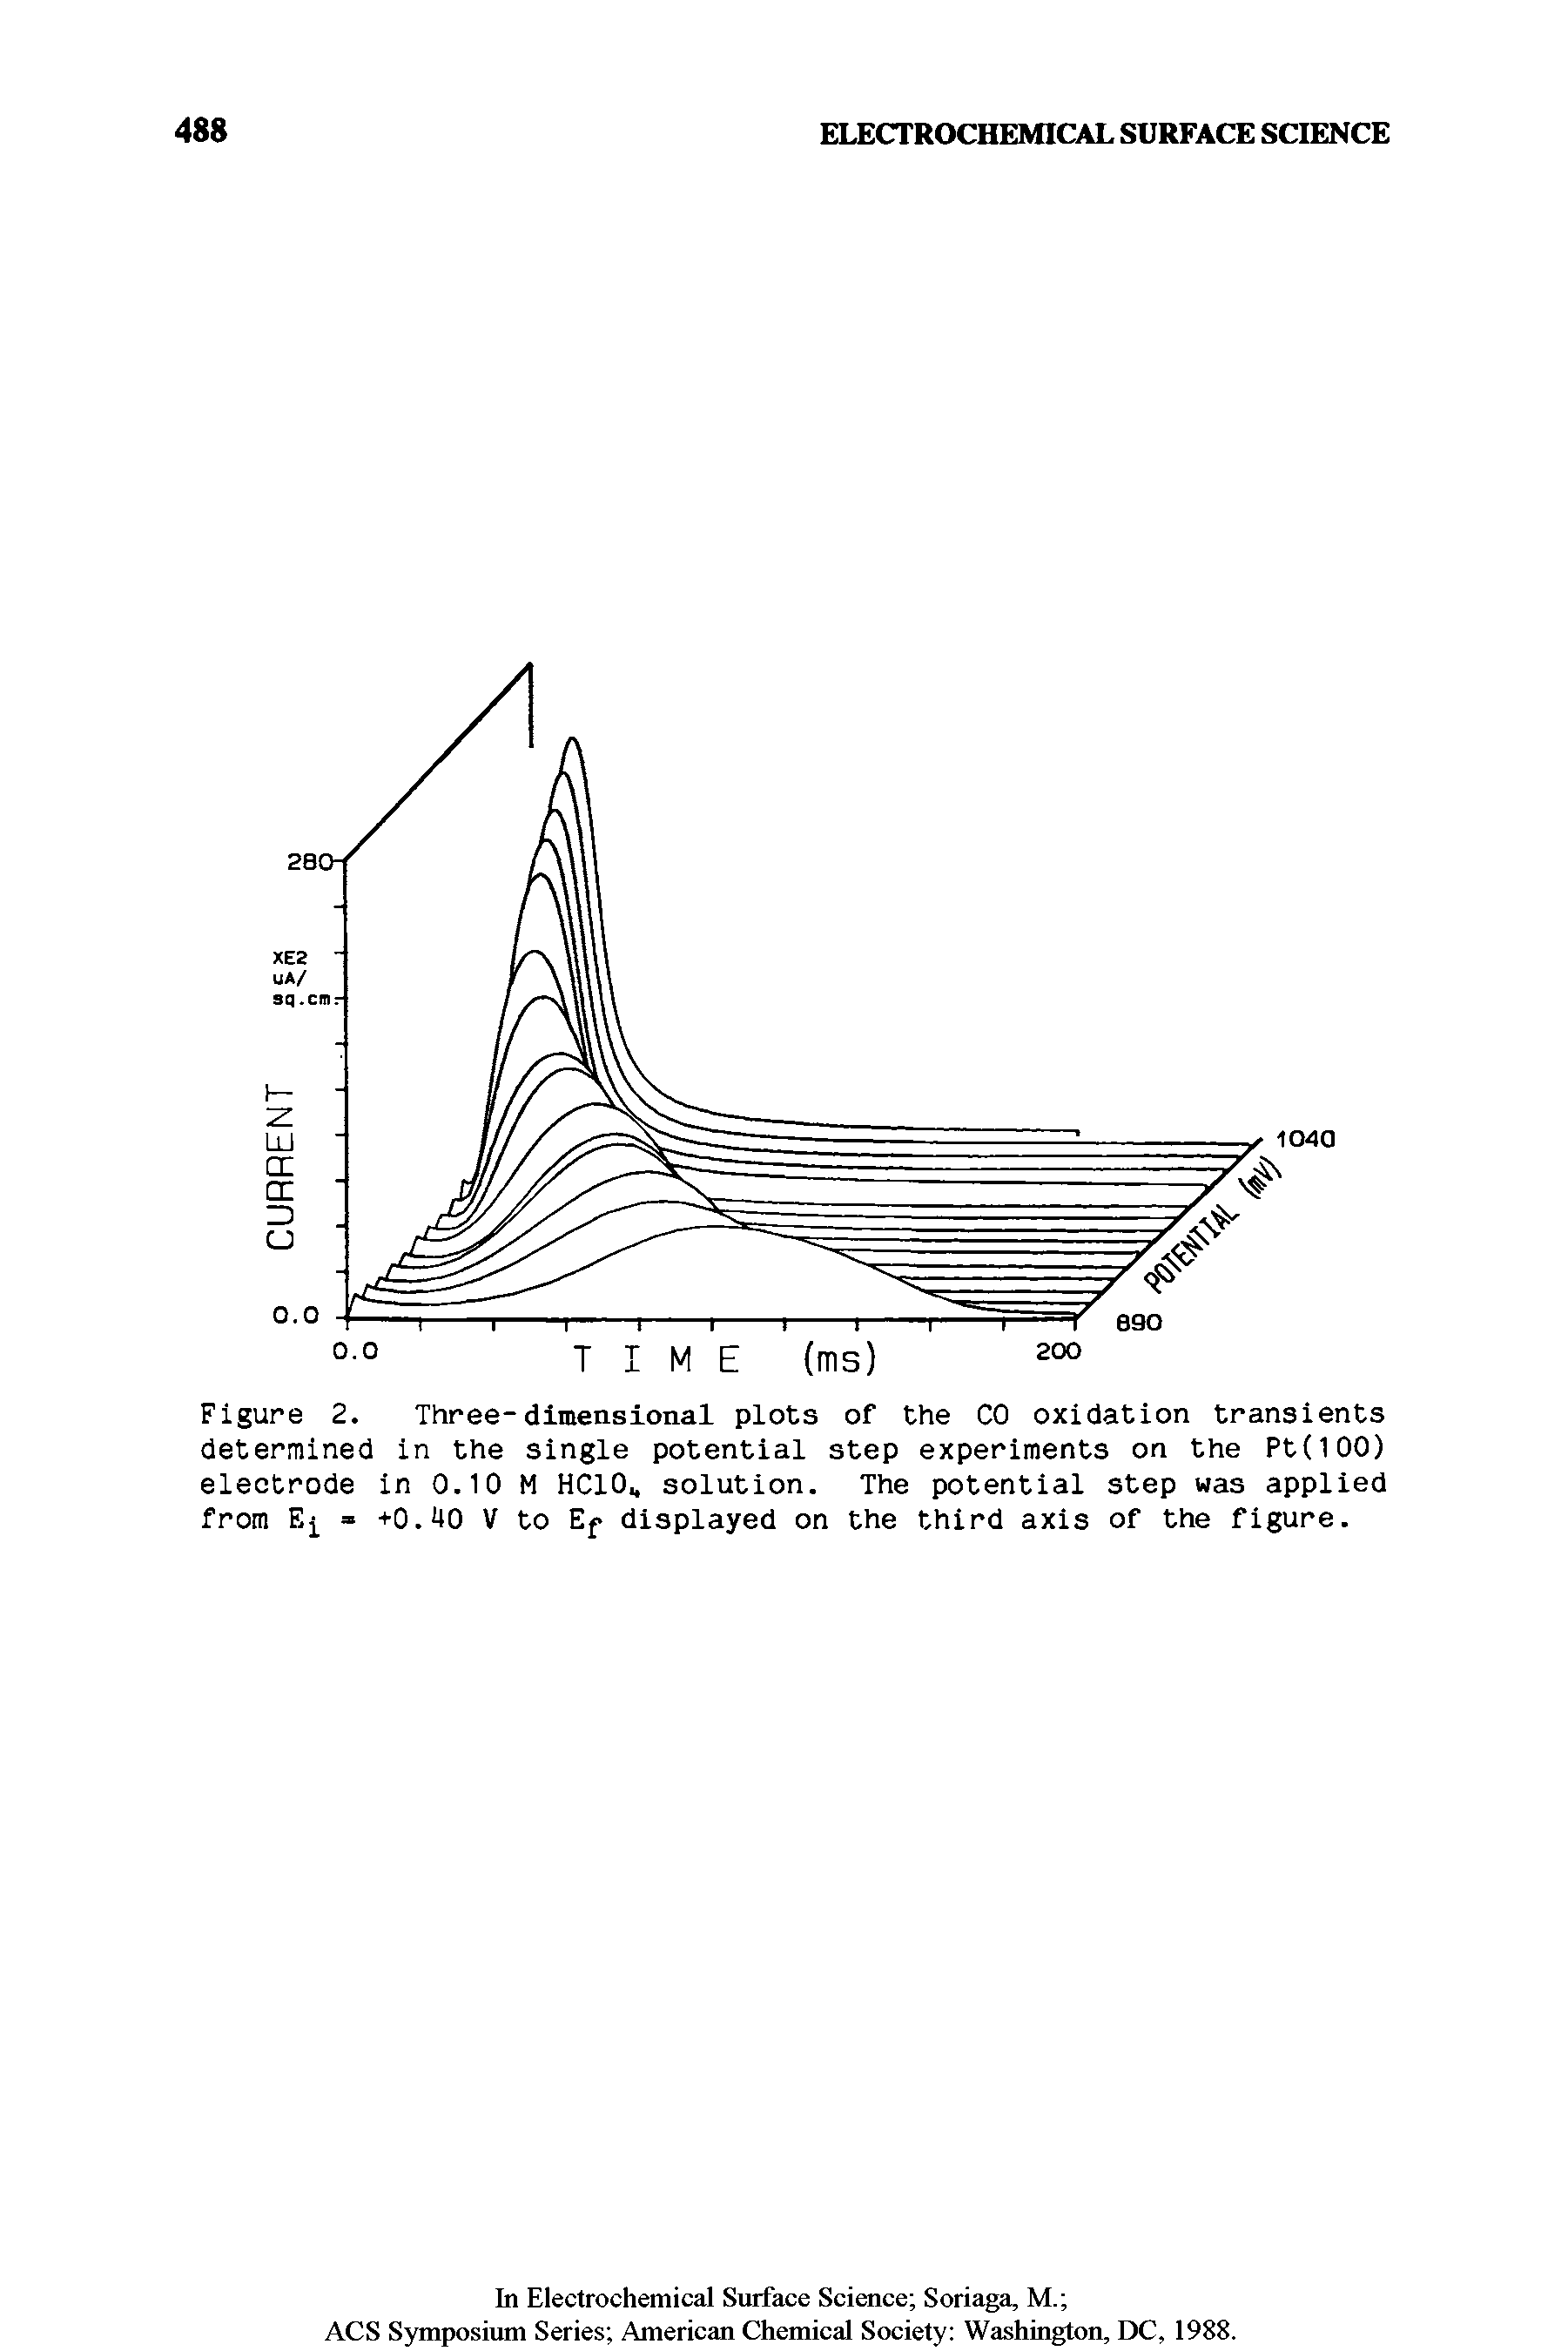 Figure 2. Three-dimensional plots of the CO oxidation transients determined in the single potential step experiments on the Pt(100) electrode in 0.10 M HC10., solution. The potential step was applied from E = +0.40 V to Ep displayed on the third axis of the figure.